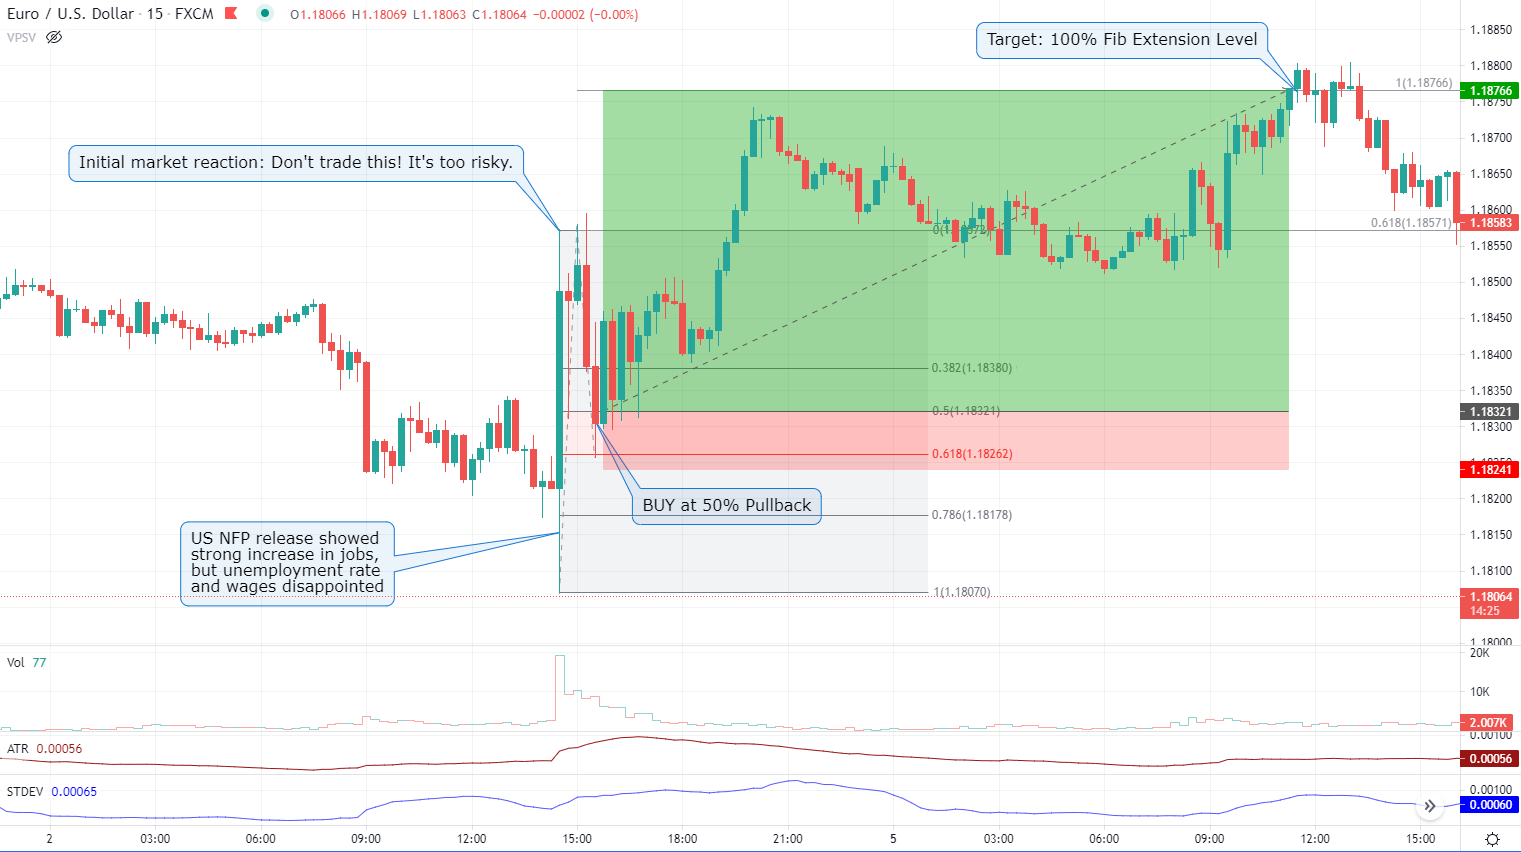 The 50% Pullback Strategy in forex